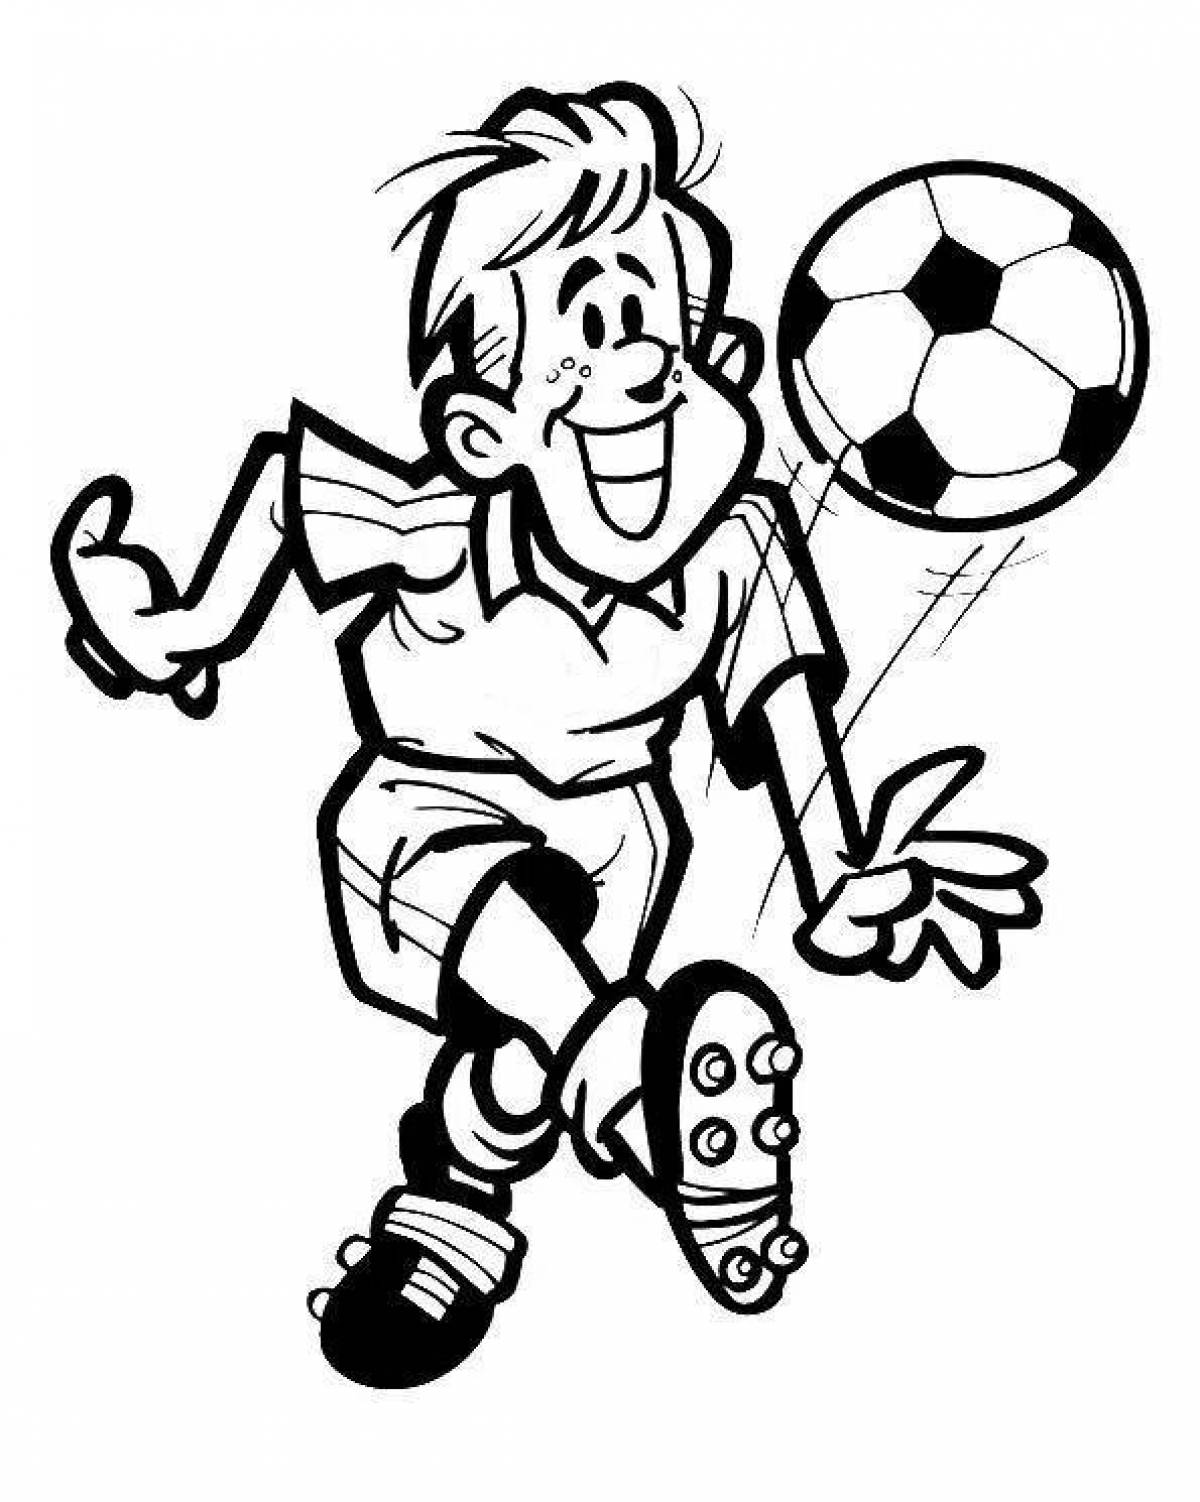 Coloring book brave football player